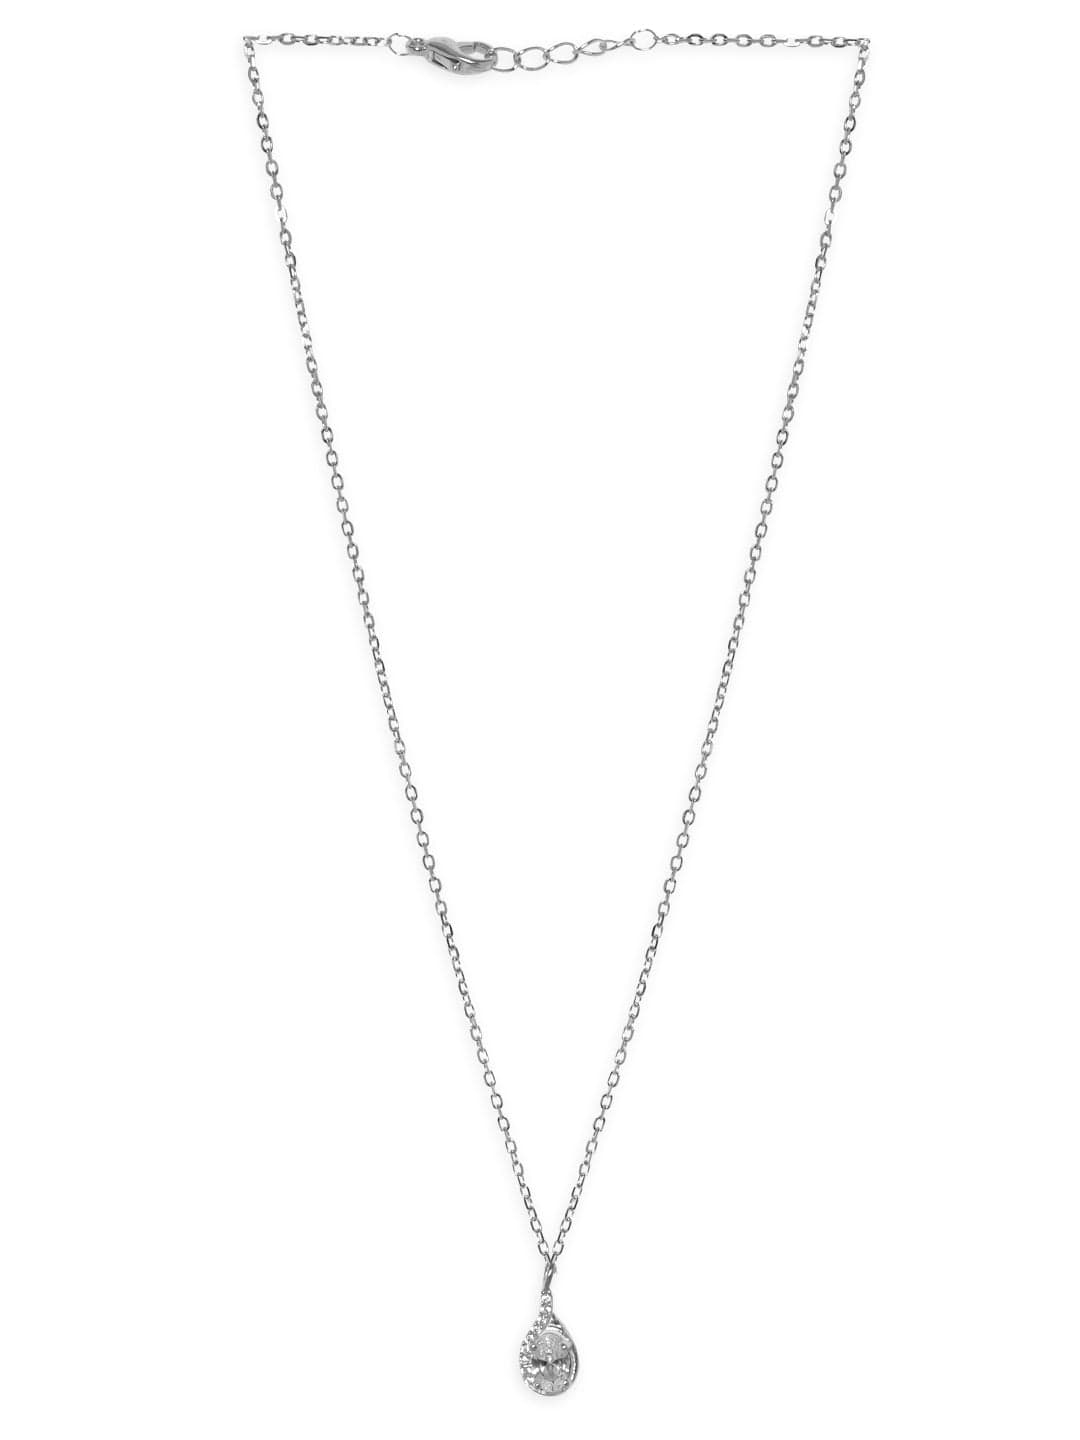 Rubans 925 Silver Rhodium plated zirconia studded pendant drop necklace. Necklaces, Necklace Sets, Chains &amp; Mangalsutra